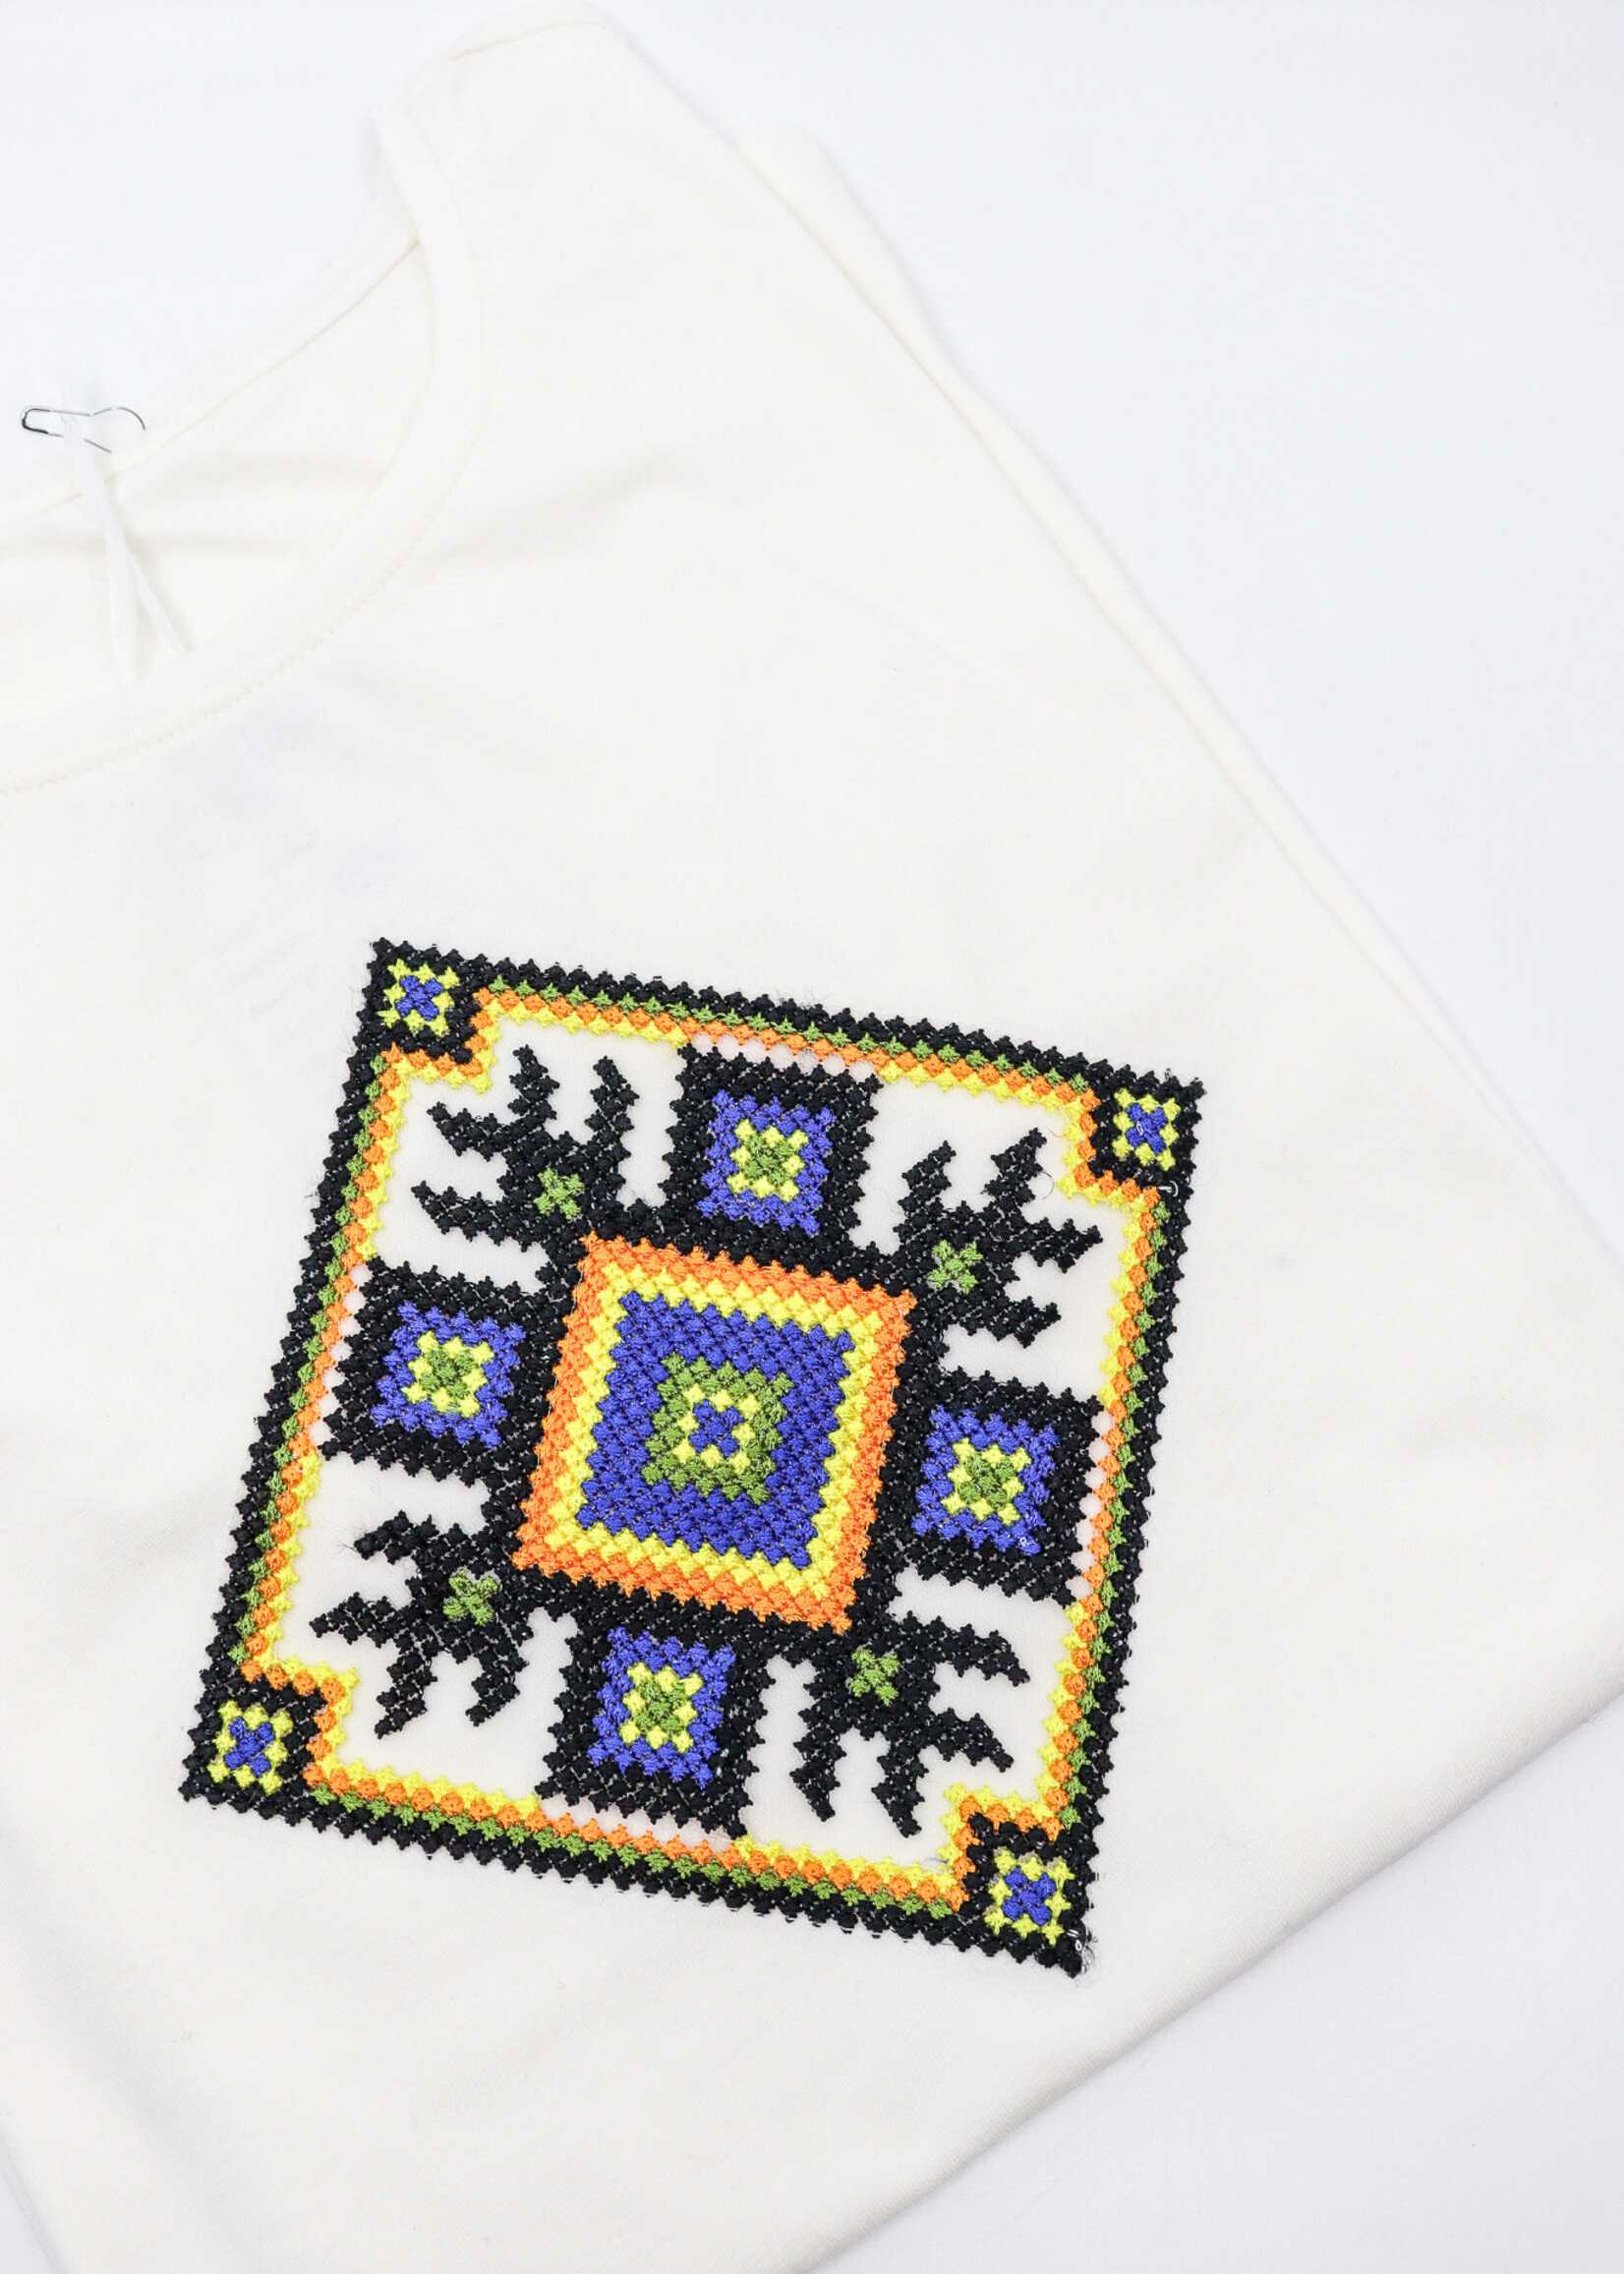 APPAREL - Light Cream T-Shirt (W), with a   diamond shaped colorful  embroidery